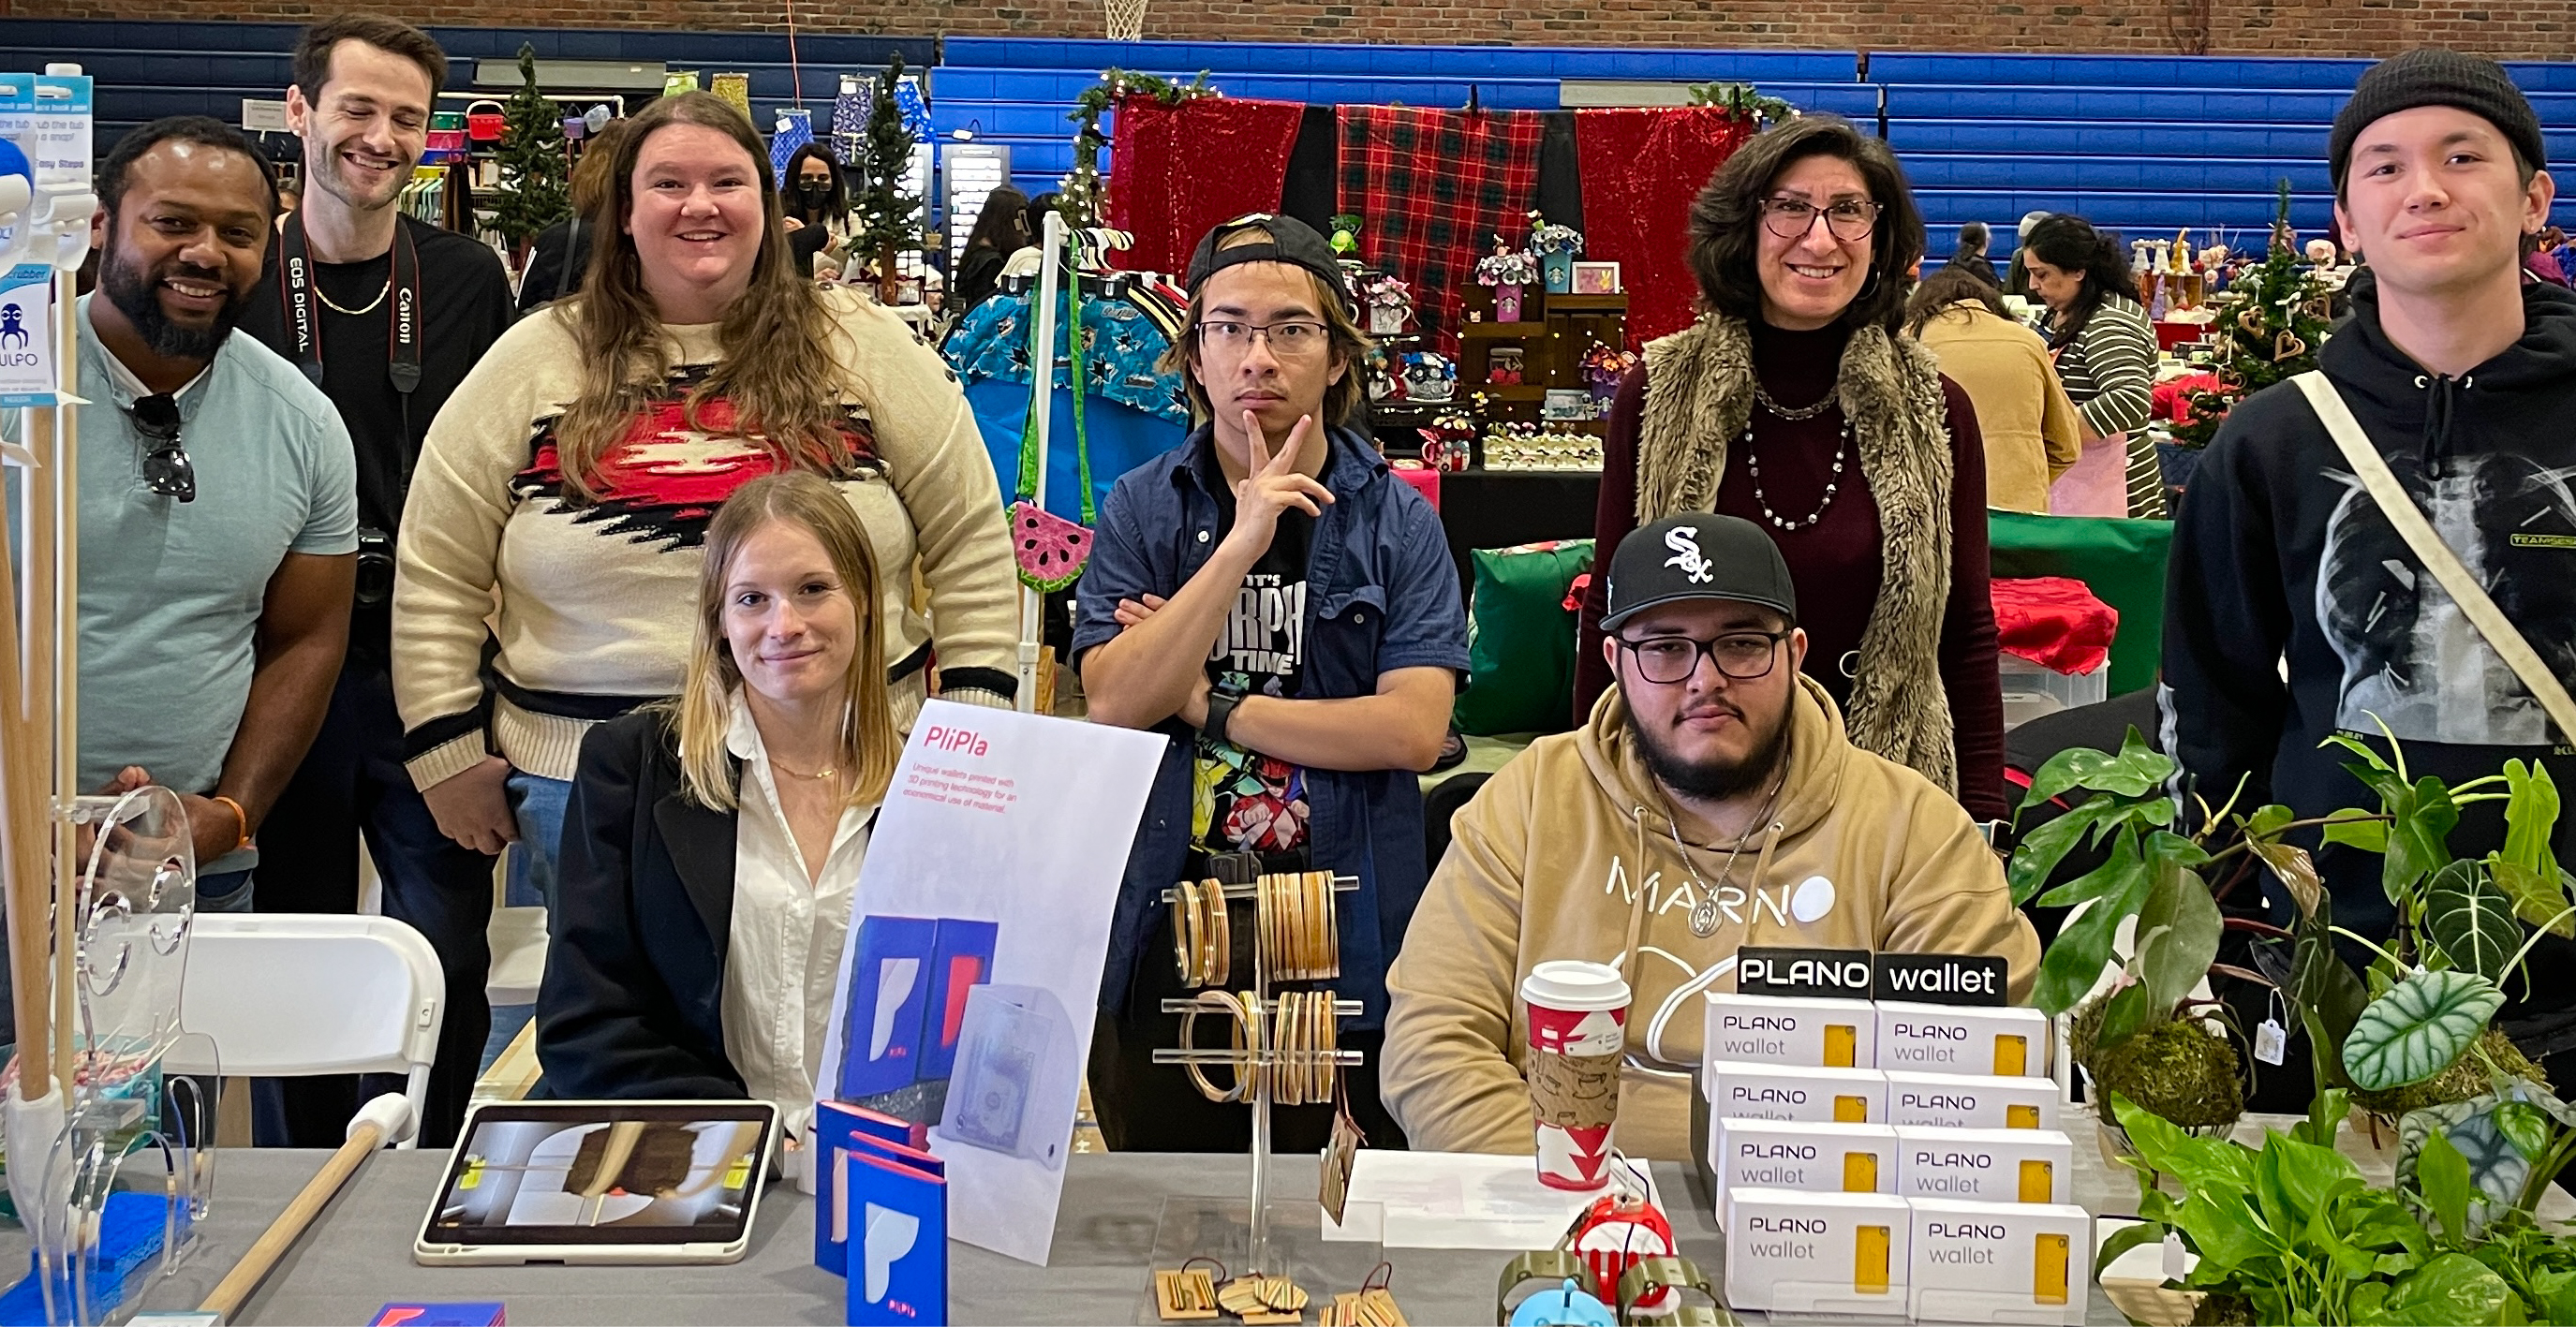 Group Photo of Students at a Craft Fair